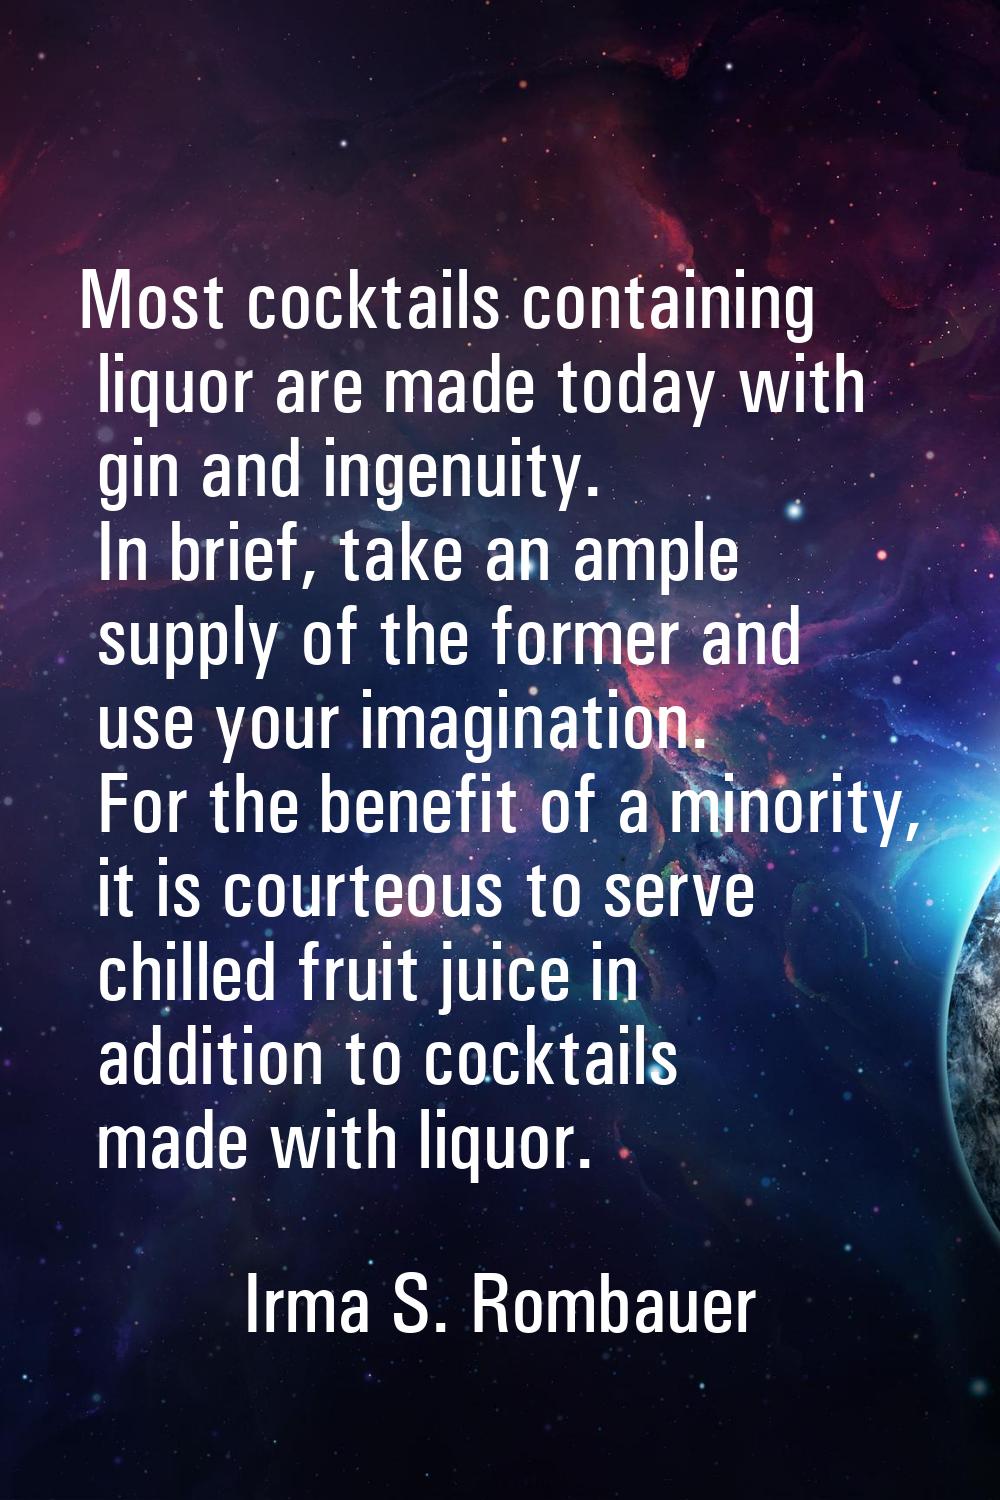 Most cocktails containing liquor are made today with gin and ingenuity. In brief, take an ample sup